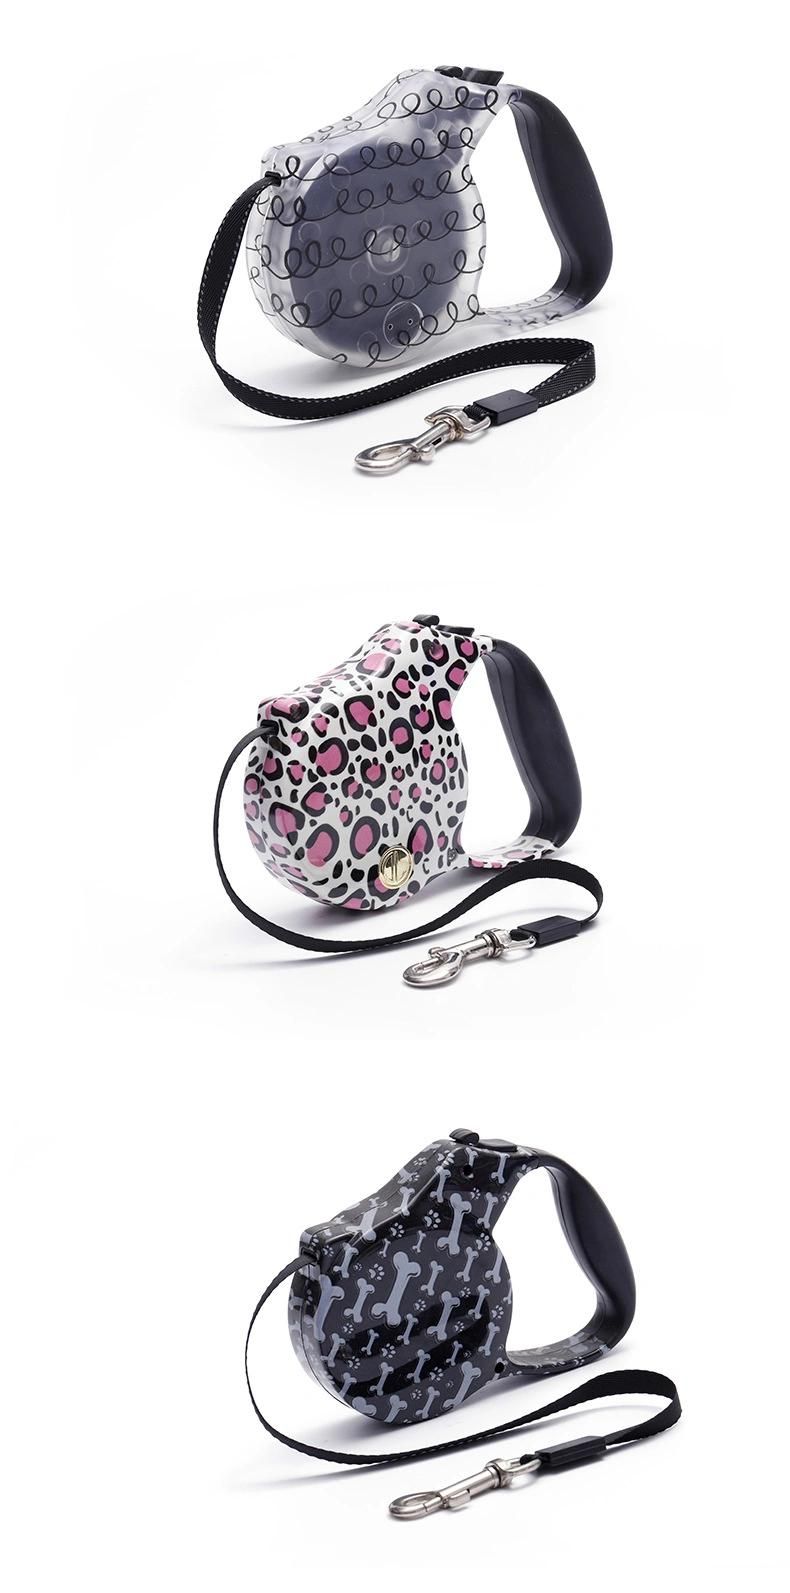 Printed Retractable Dog Leash with Poop Bag Holder